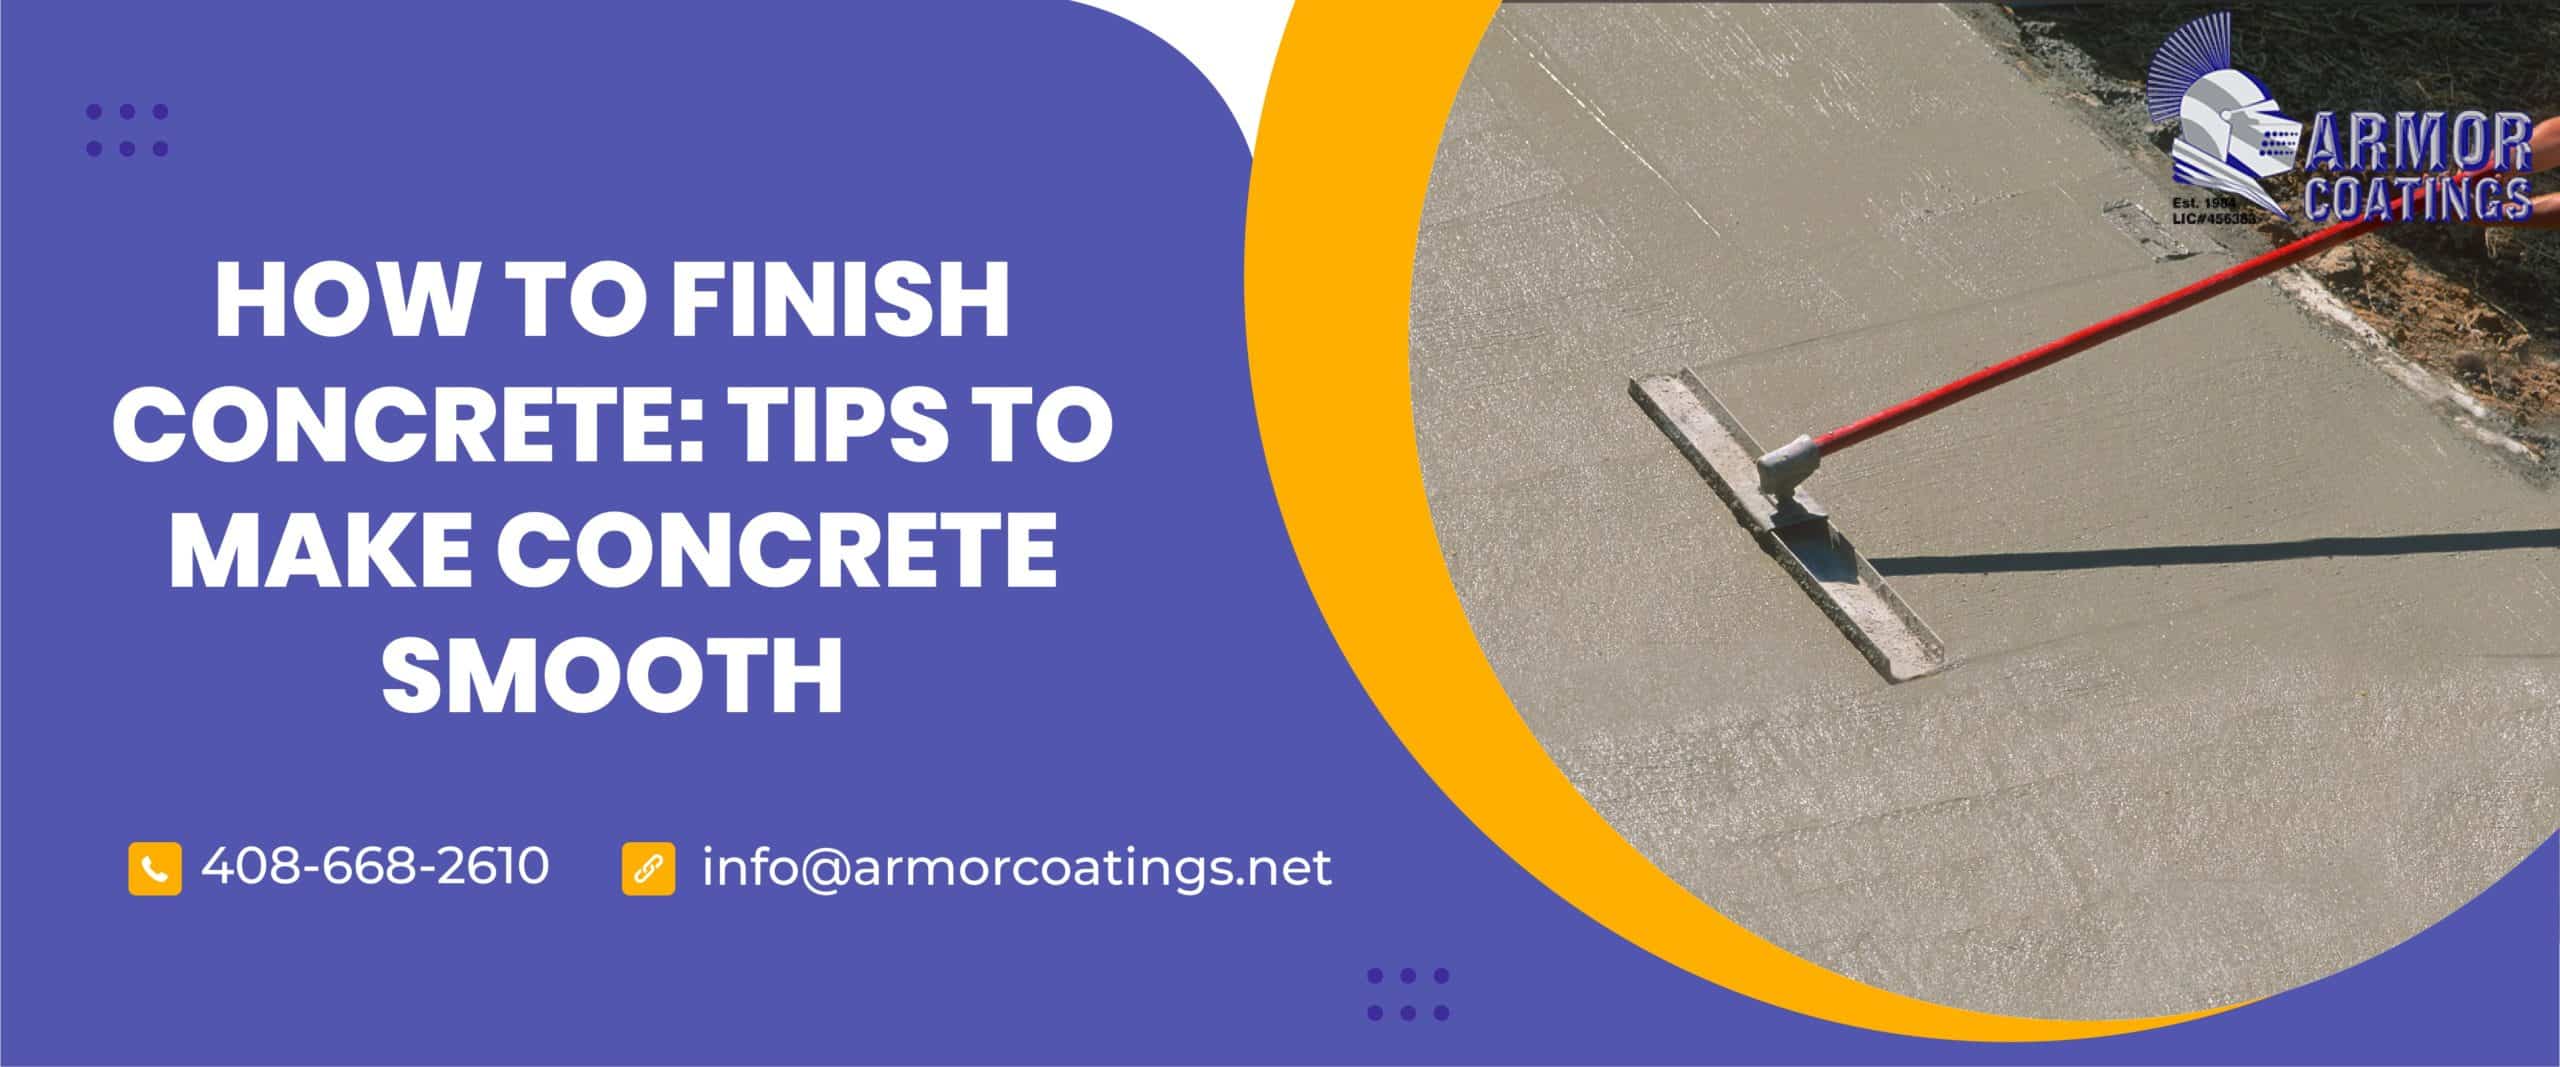 tips to finish concrete